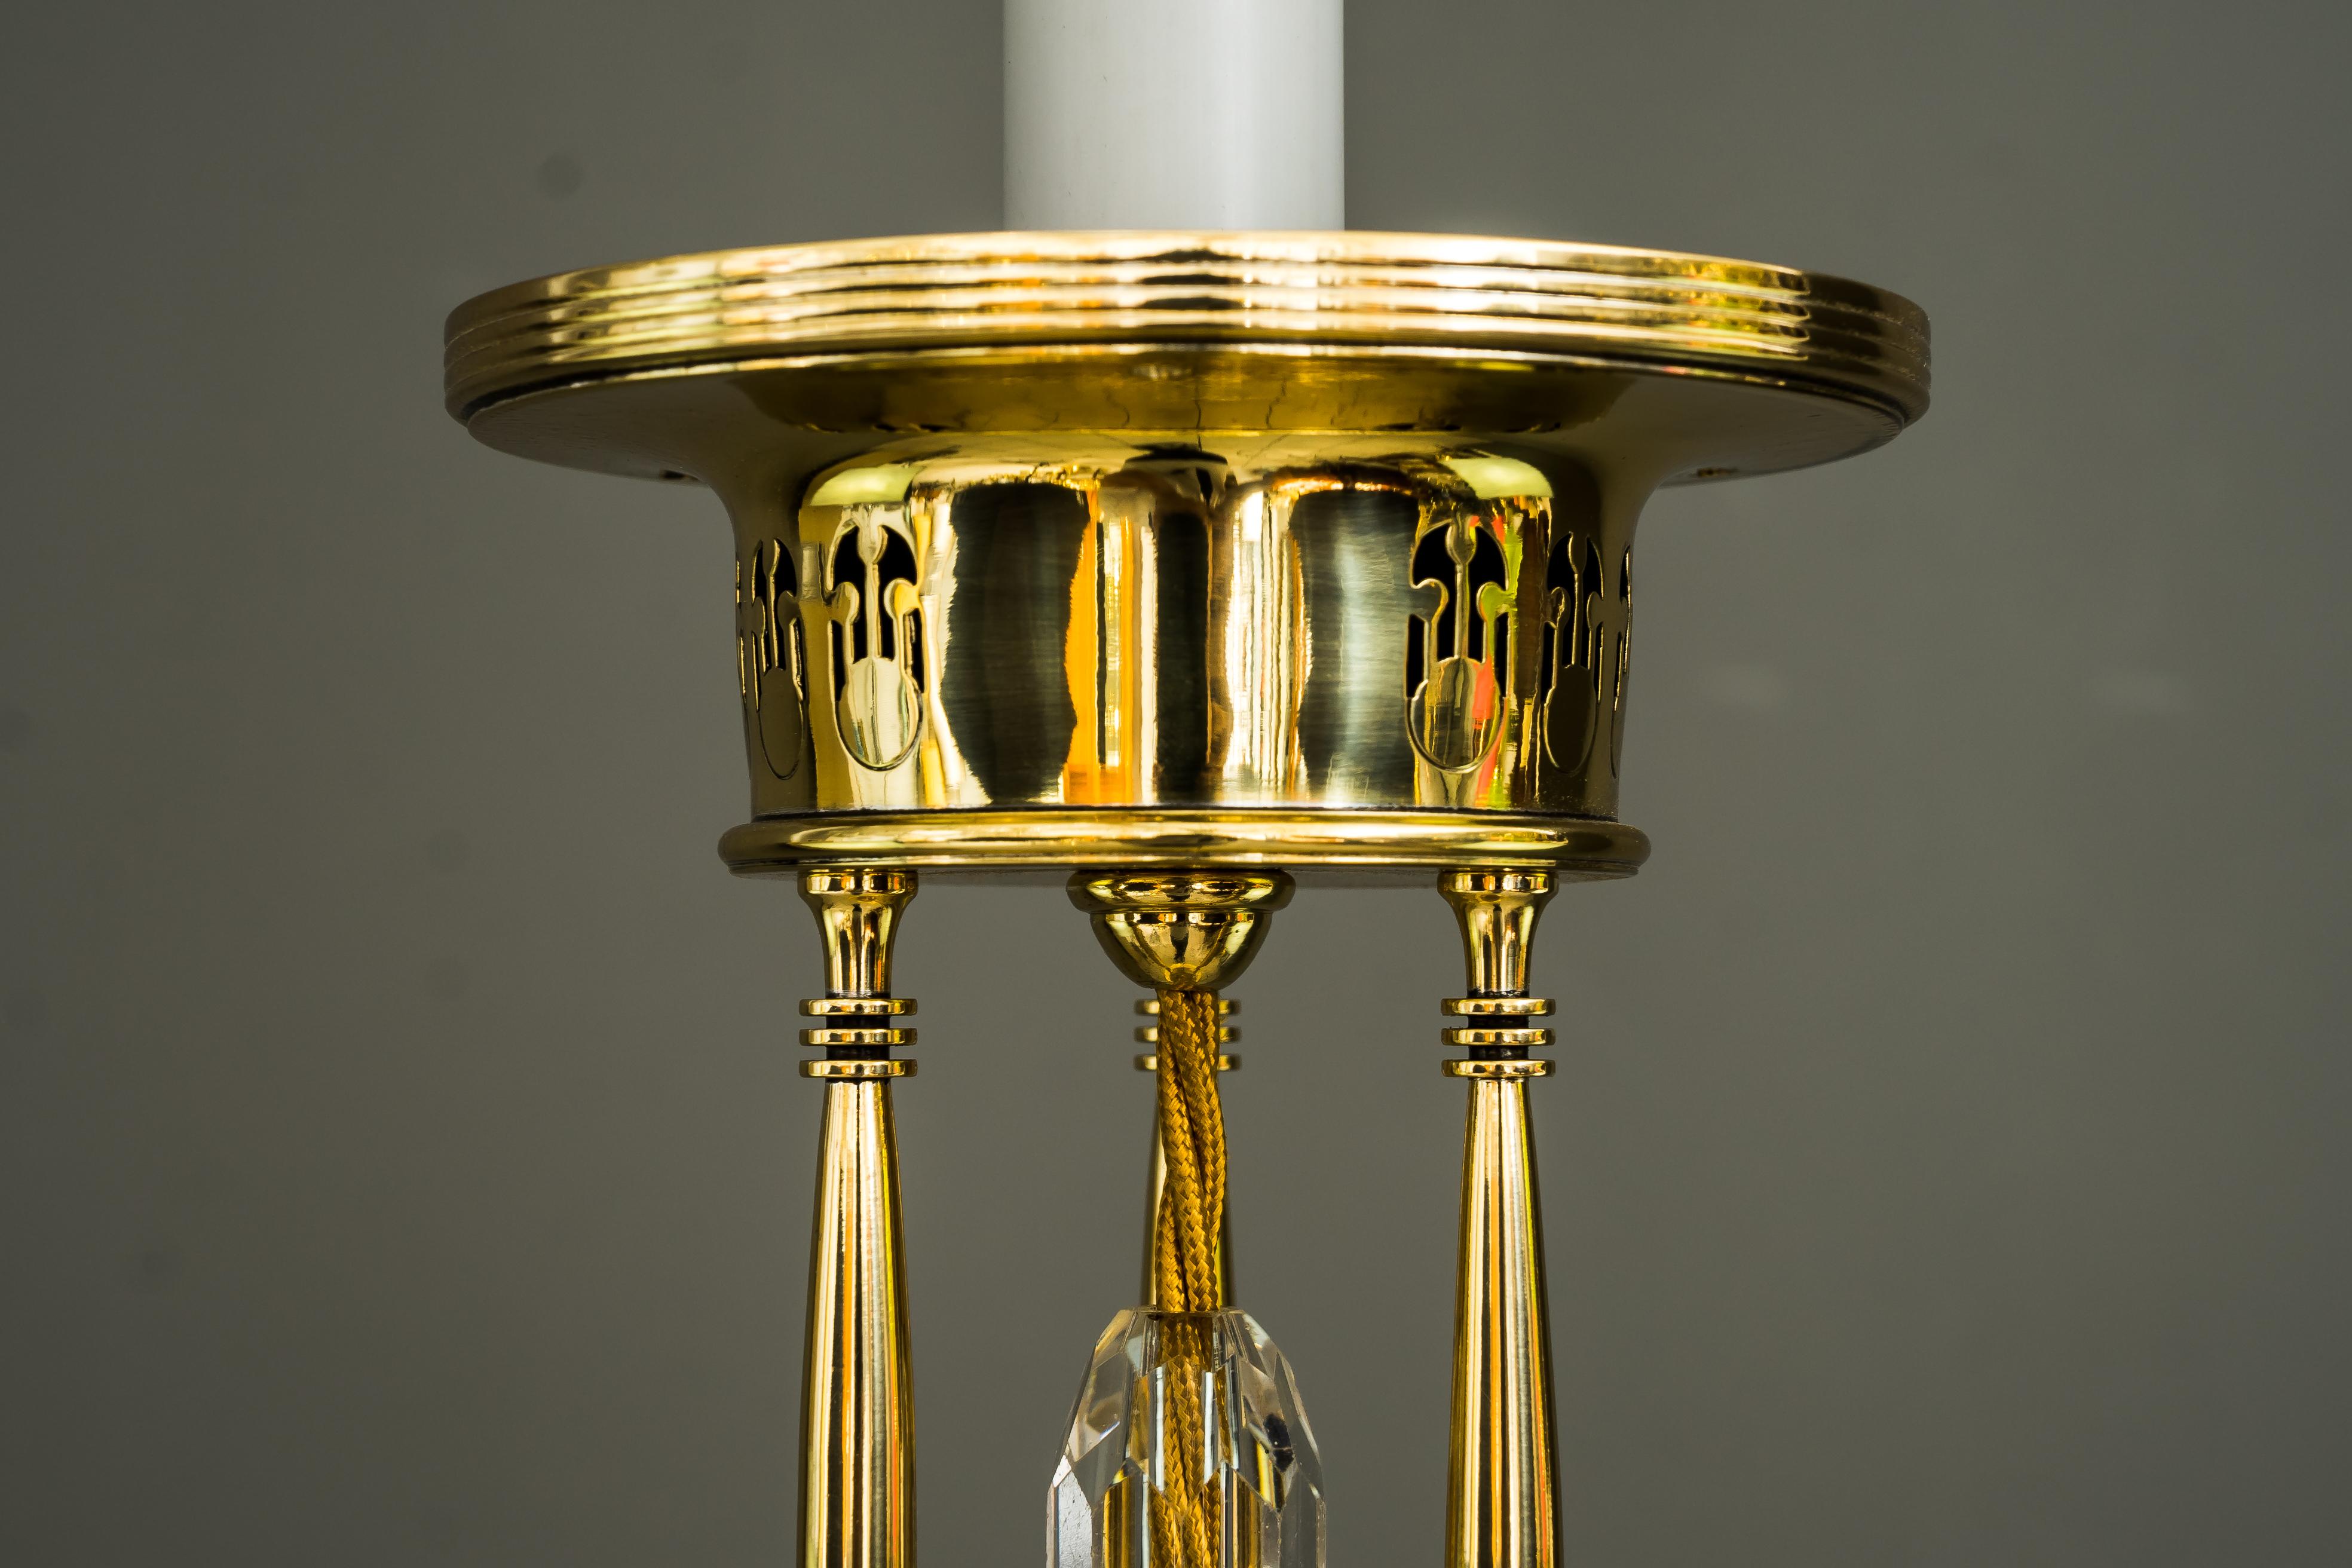 Lacquered Art Deco Ceiling Lamp Around 1920s with Original Opaline Glass Shade